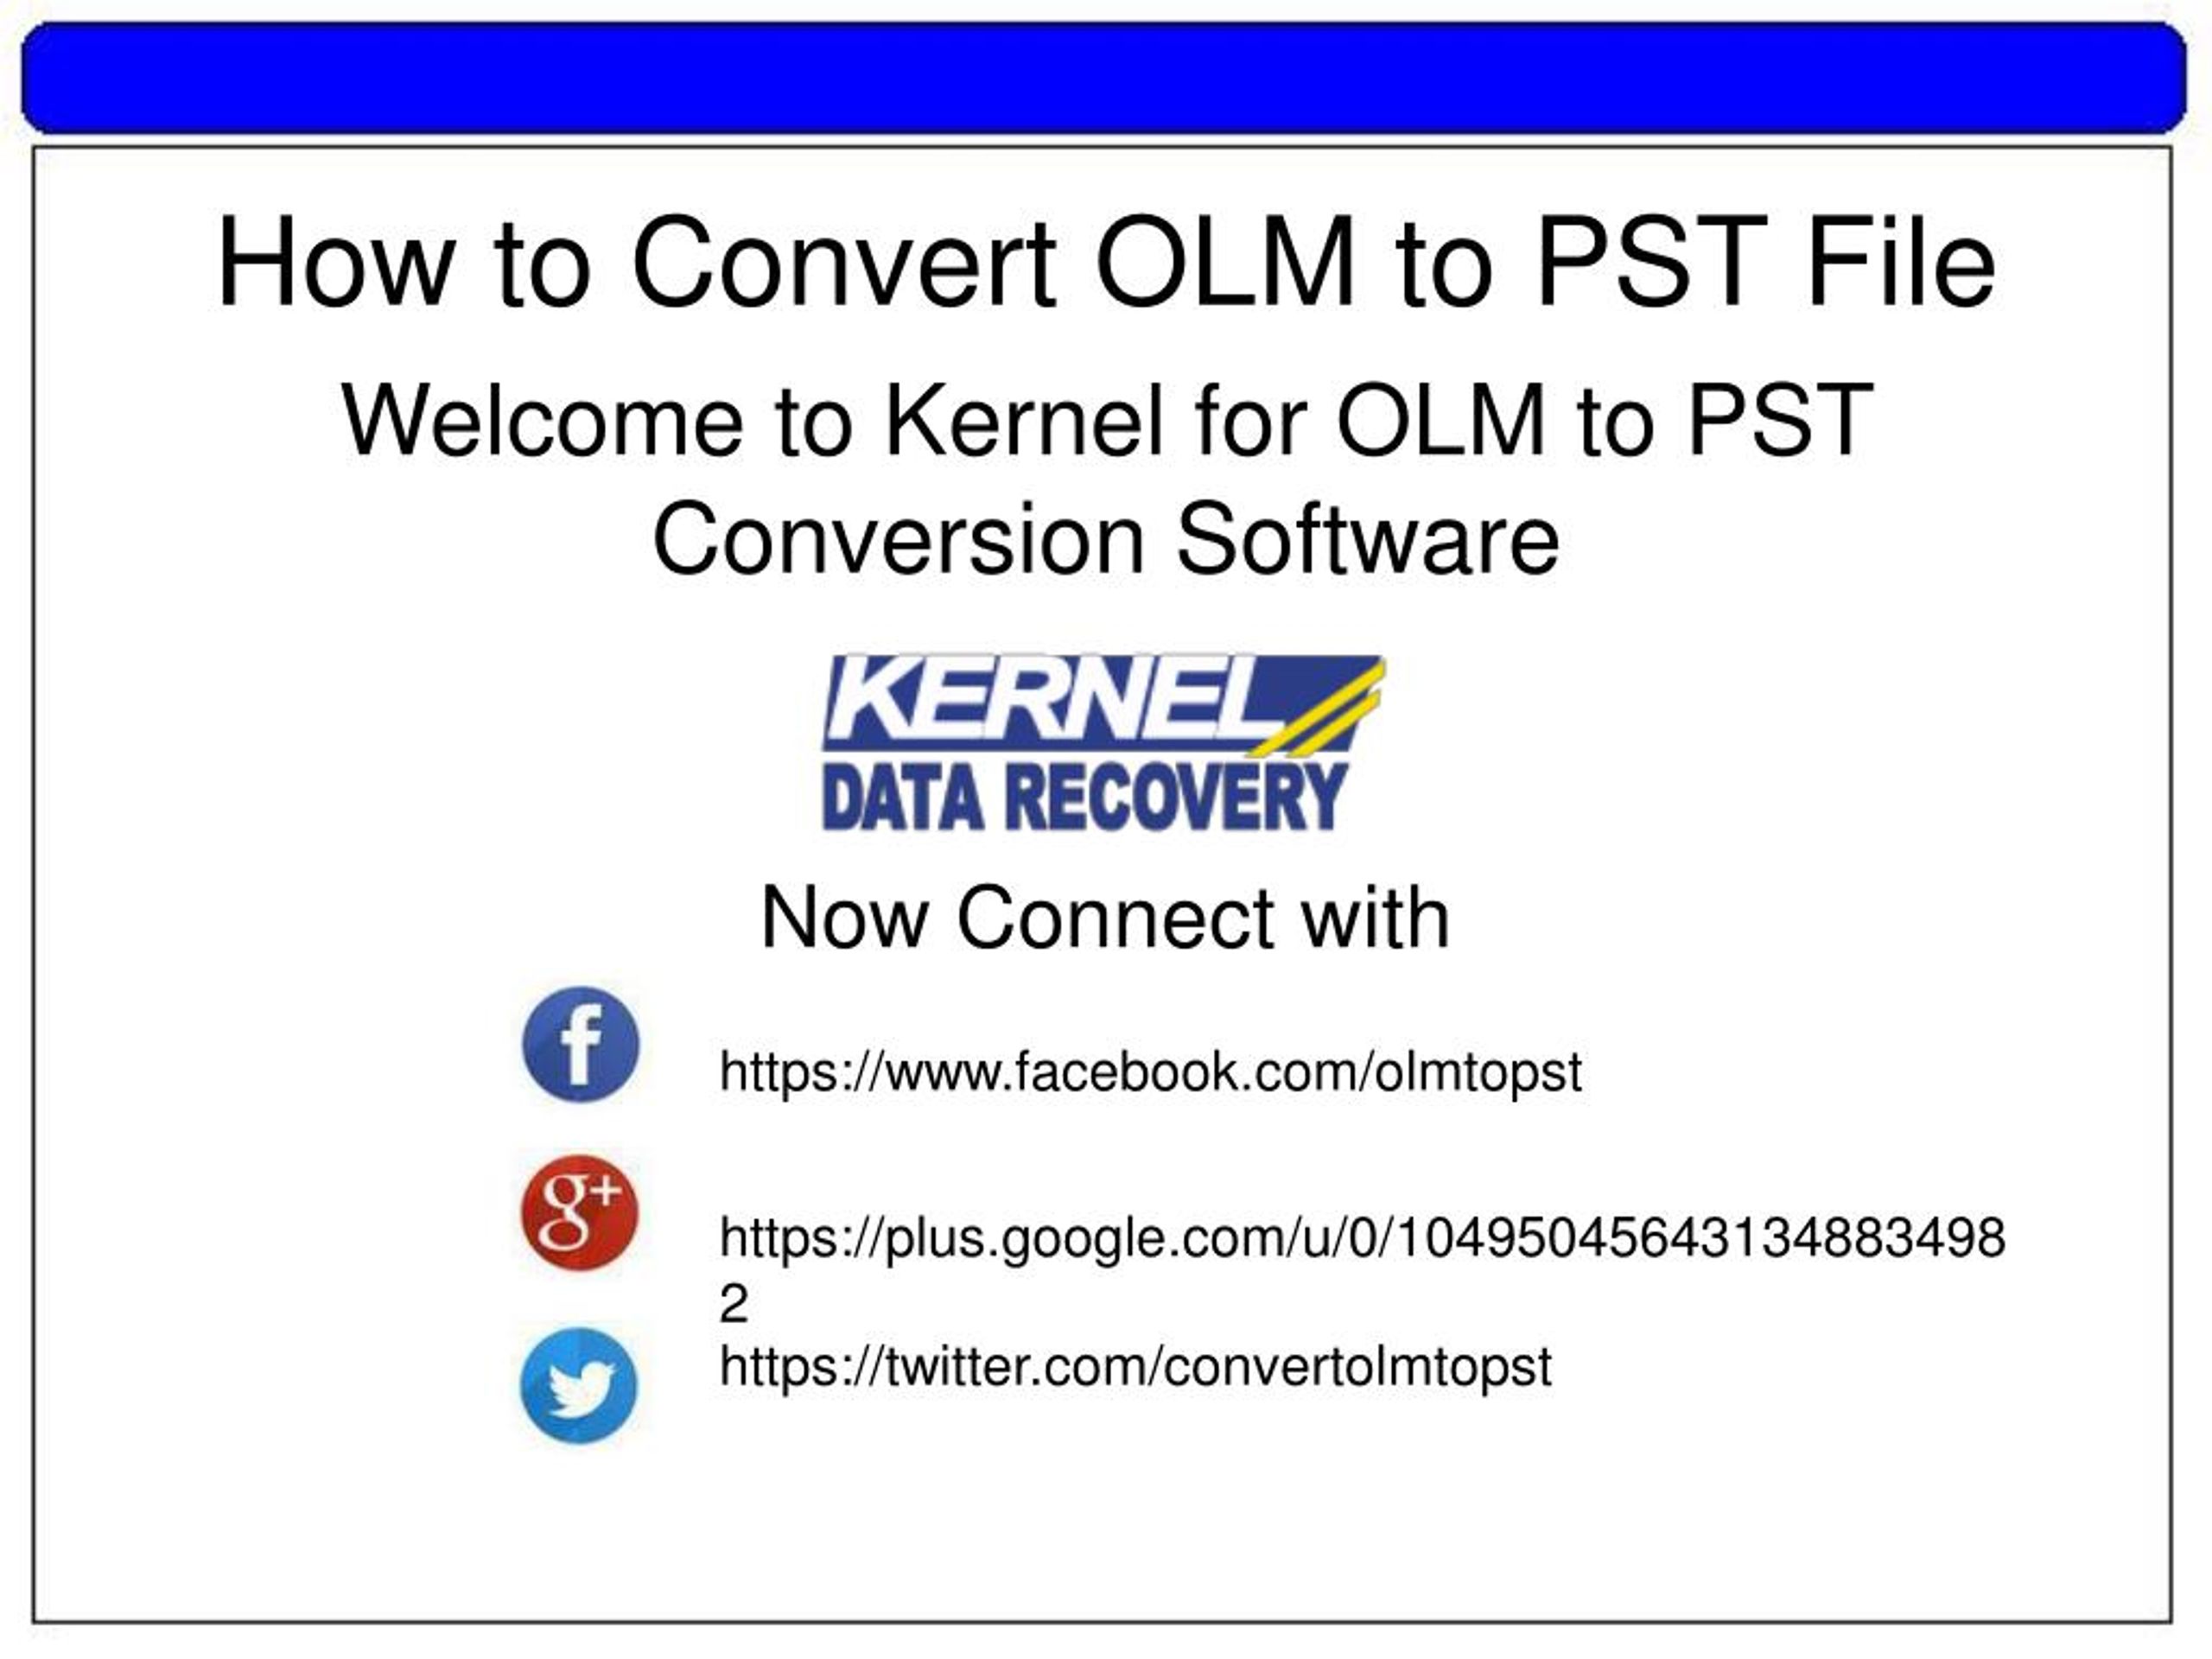 kernel for olm to pst conversion tool